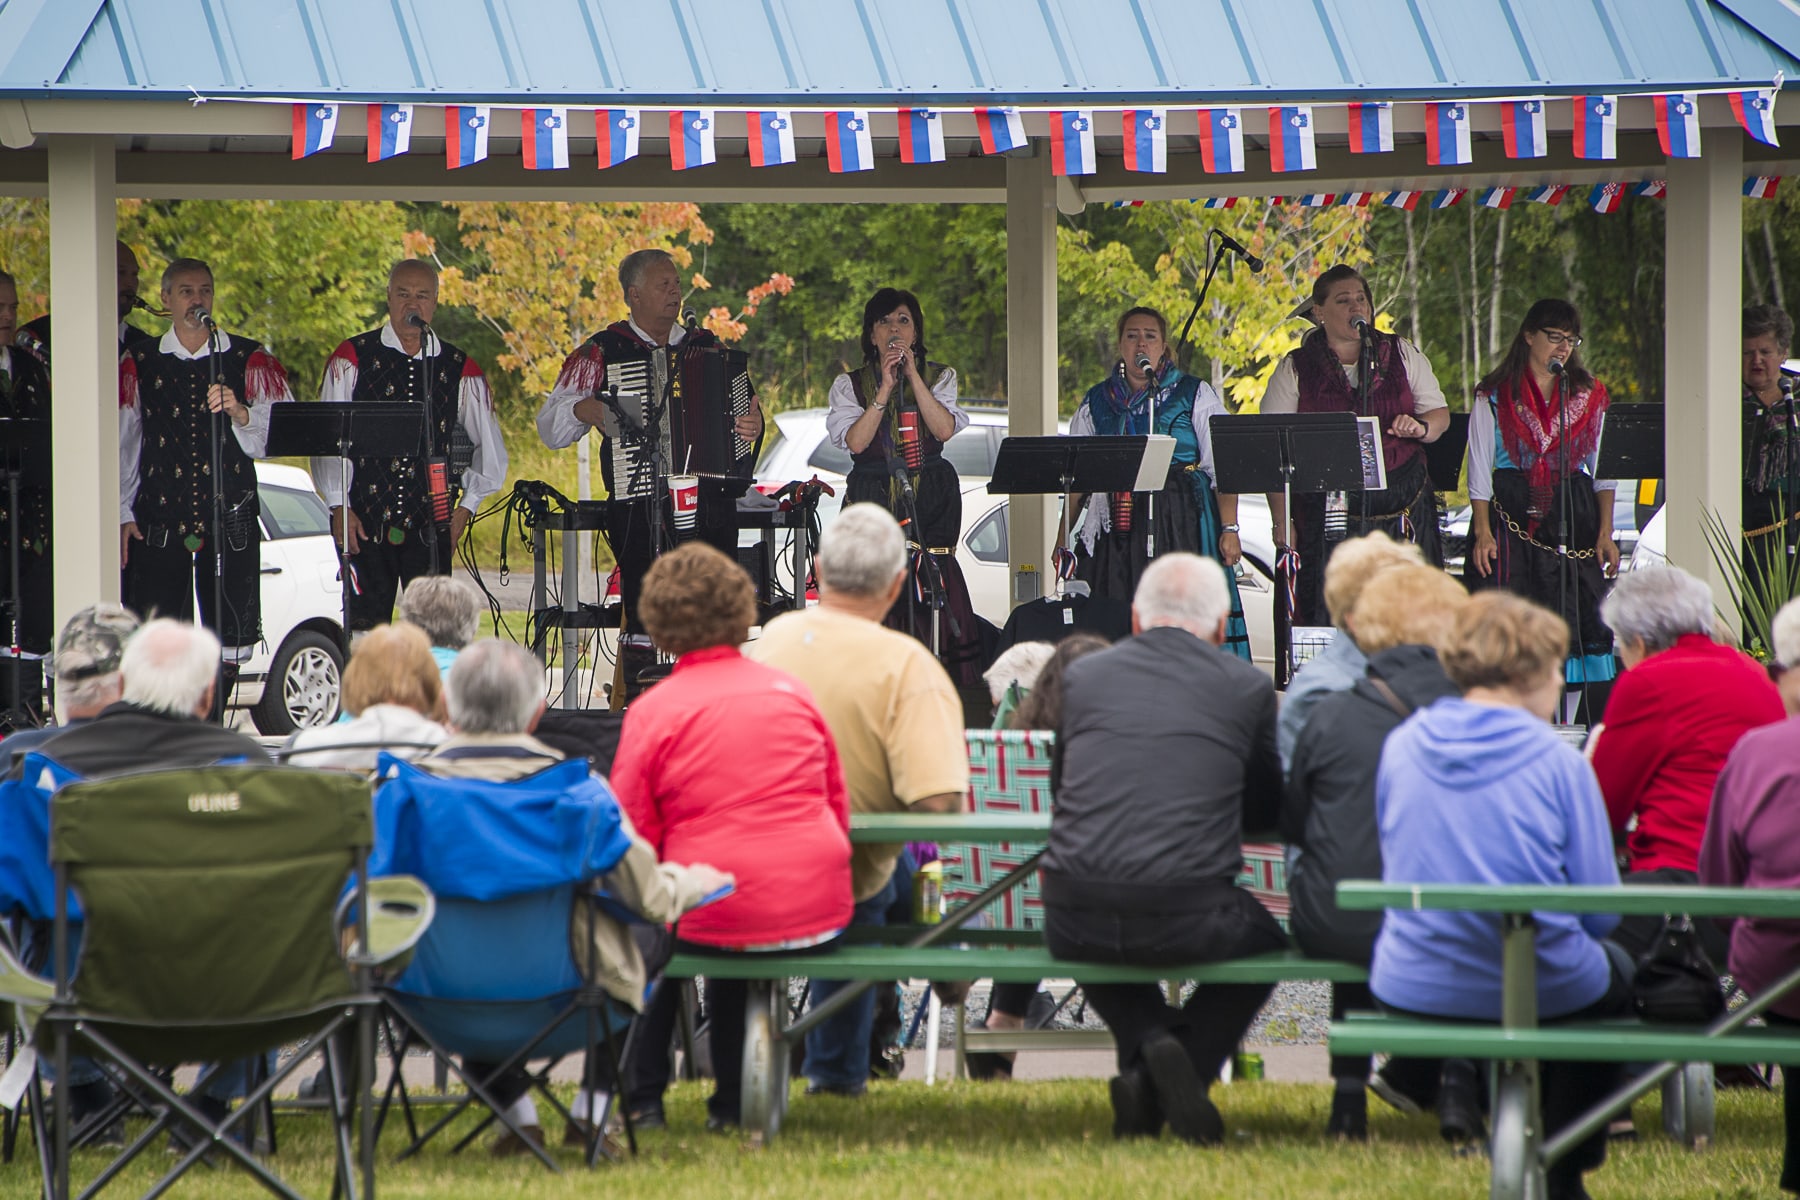 A crowd sitting at picnic tables watches a group perform under a pavilion